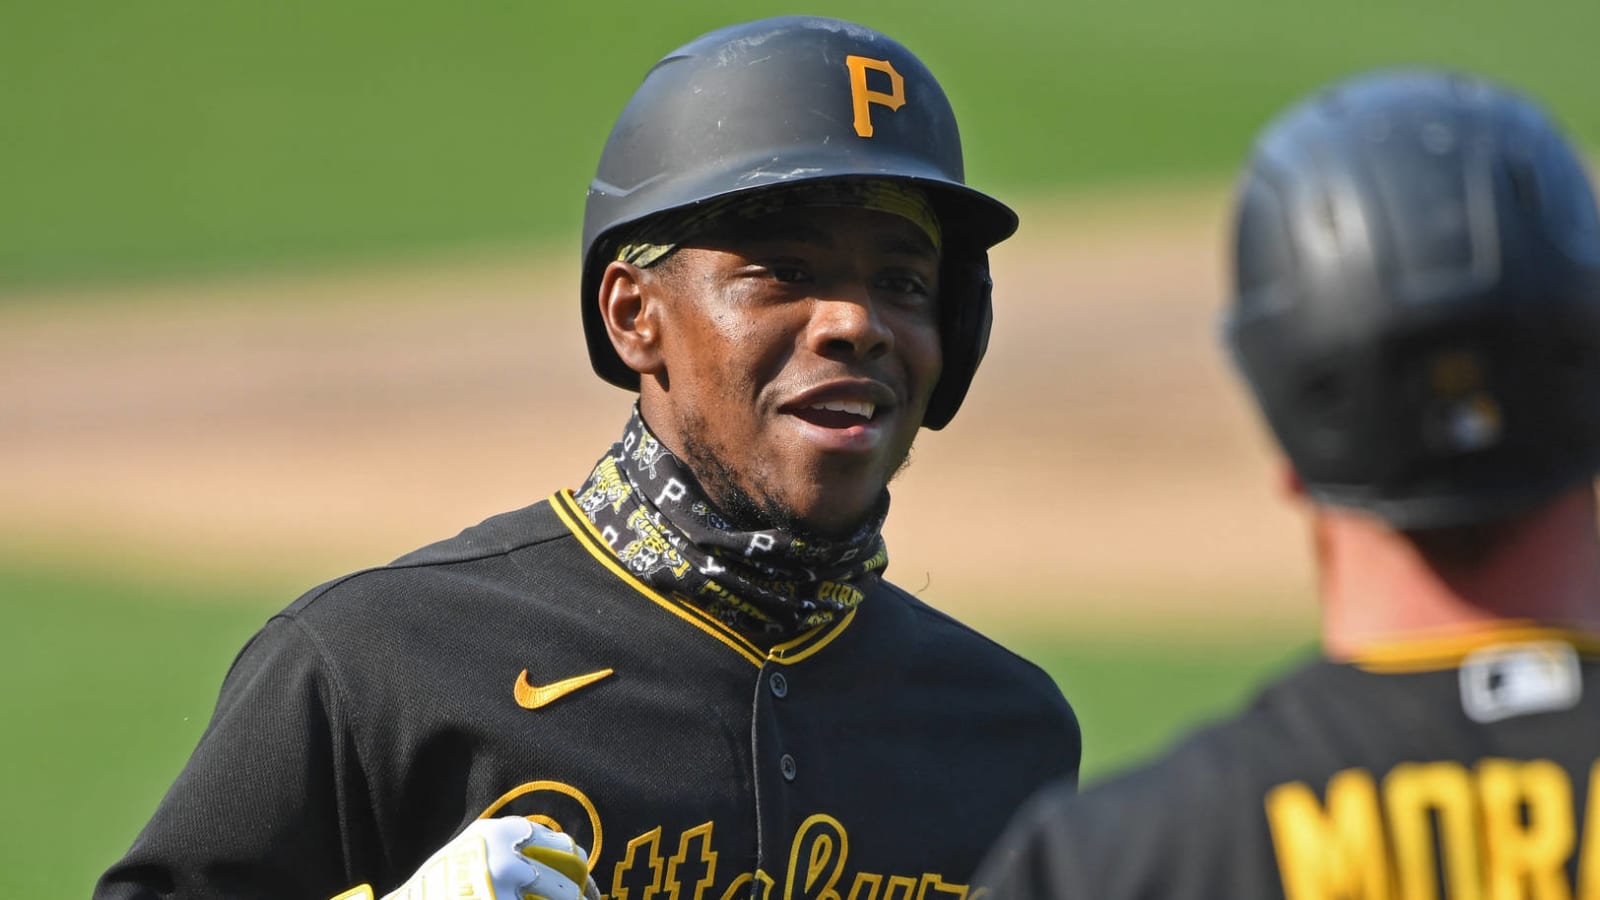 Ke'Bryan Hayes signs extension with Pirates